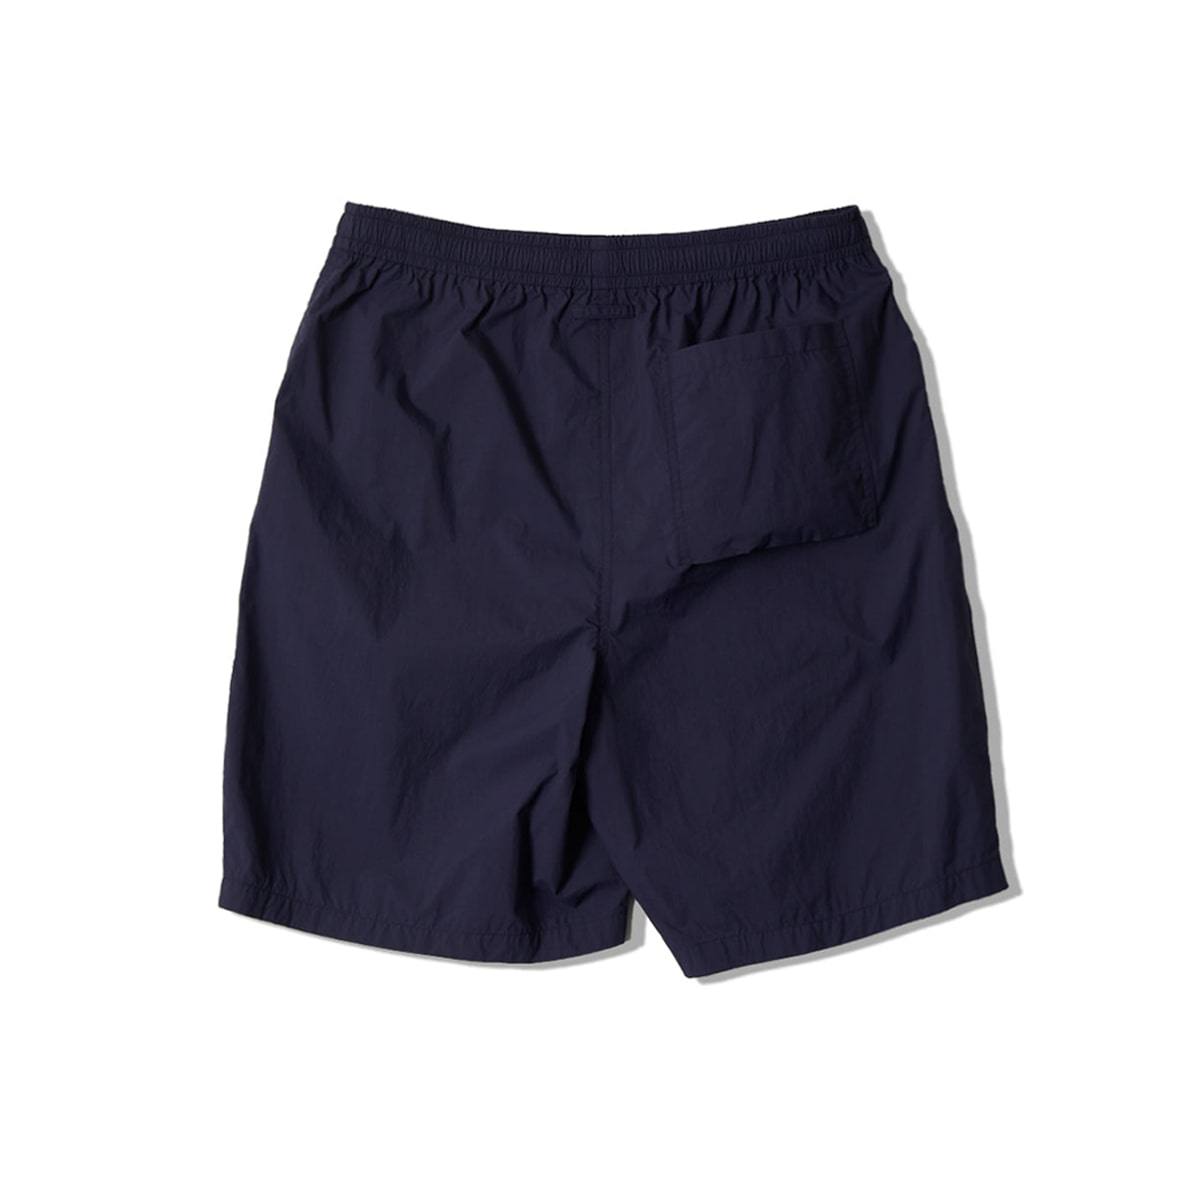 [NEITHERS] S MEDICAL SHORTS &#039;NAVY&#039;